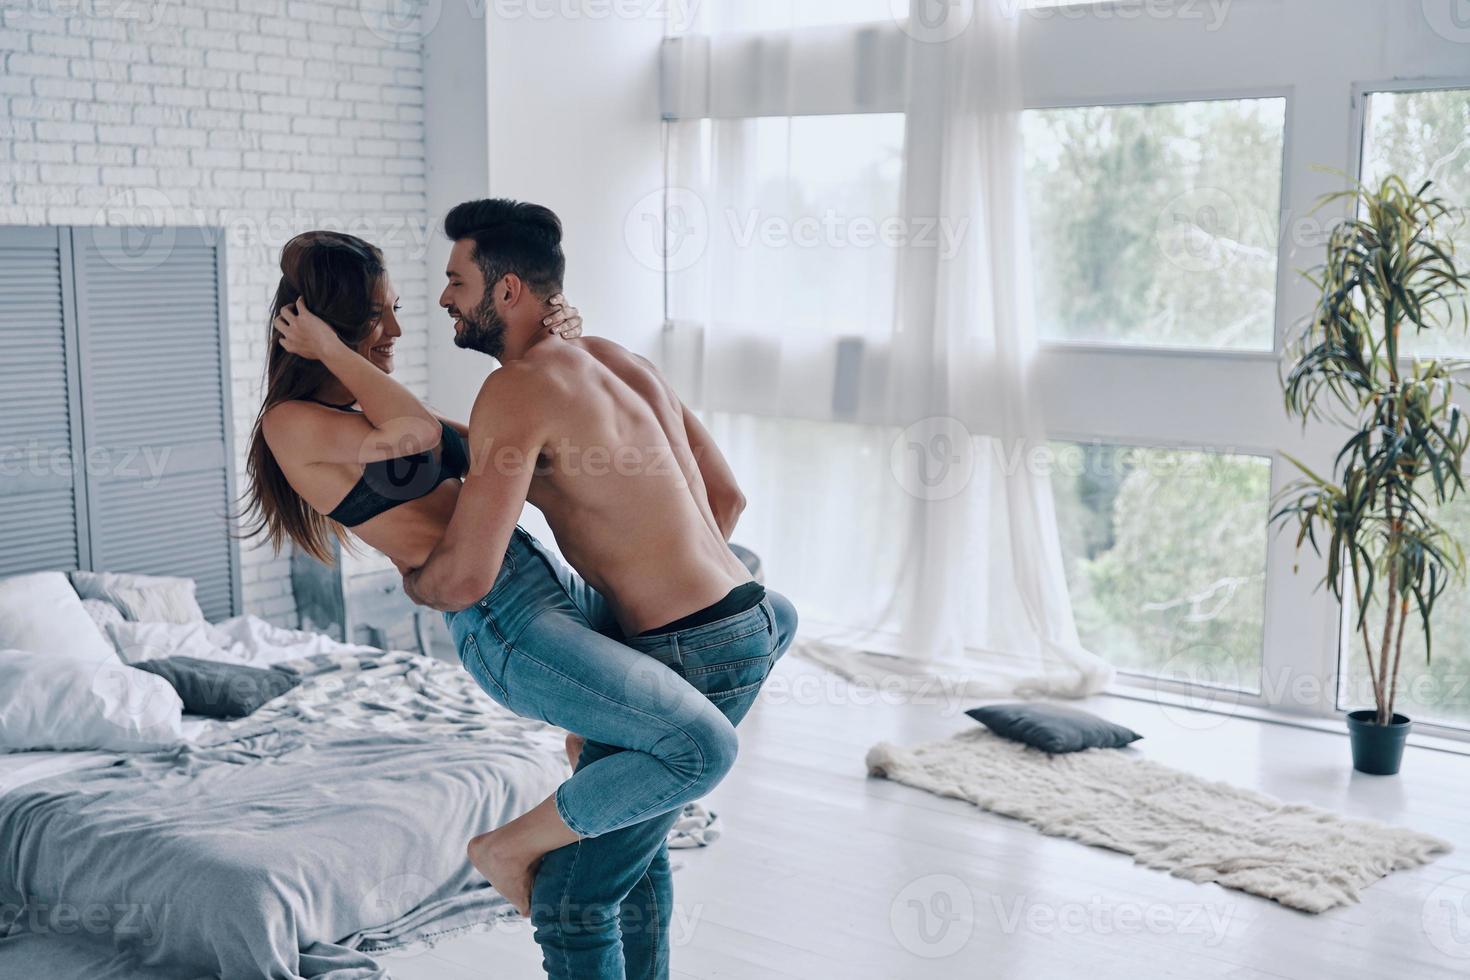 No rules for them. Handsome young shirtless man carrying semi-dressed attractive woman while standing in the bedroom photo